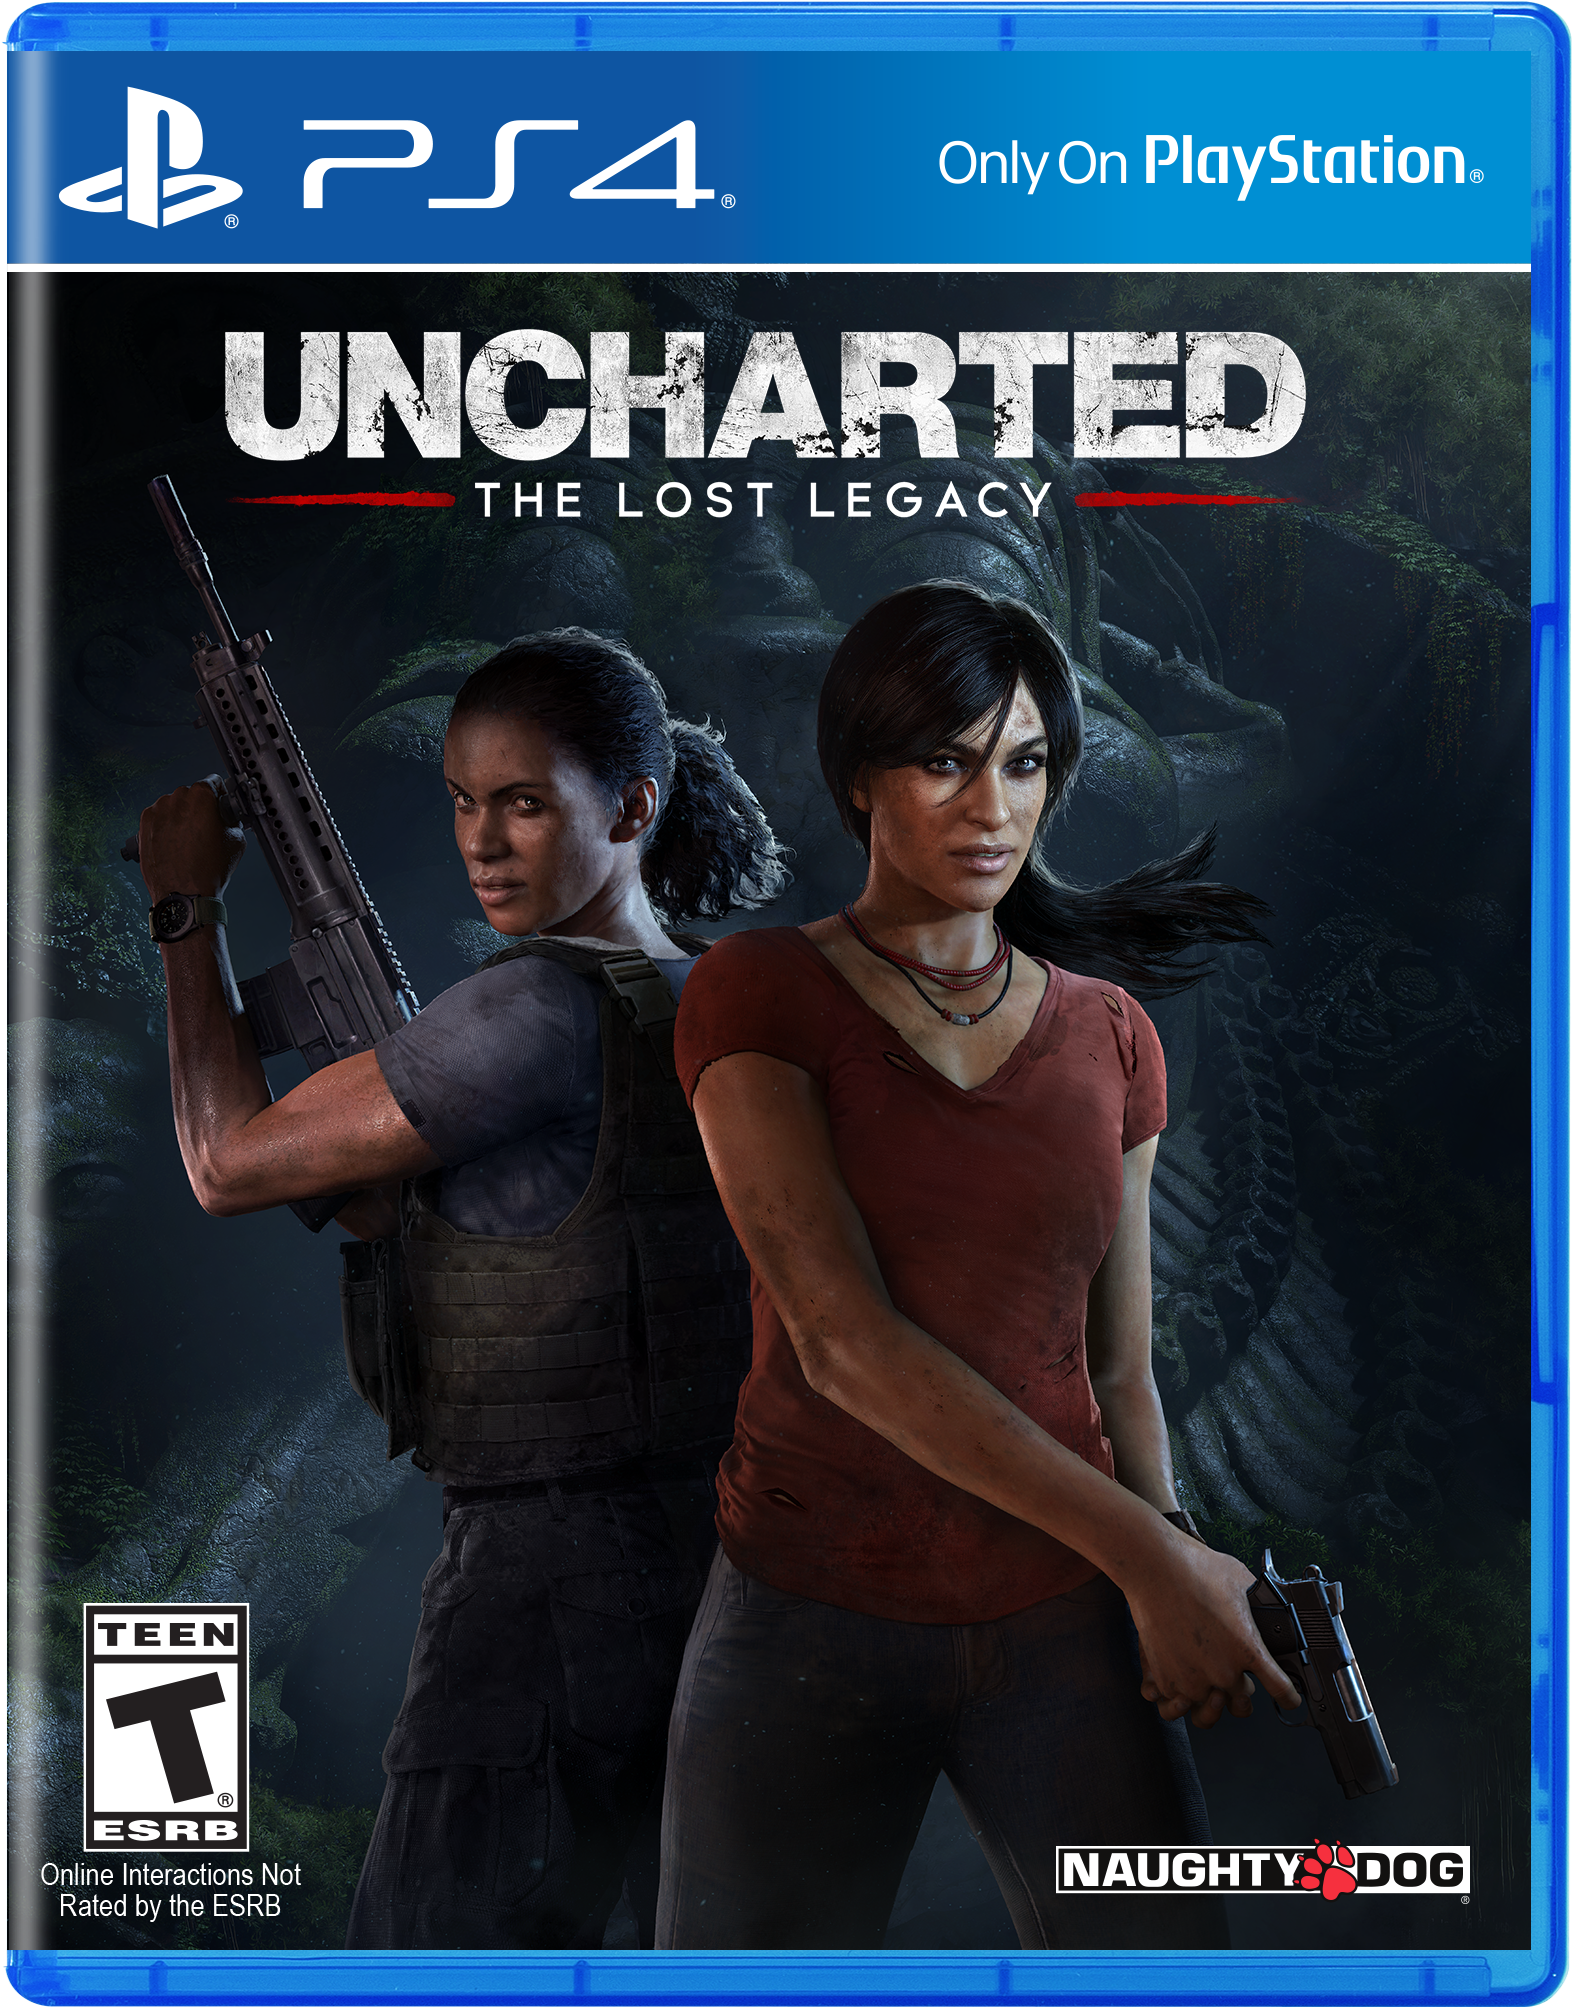 Naughty Dog Inc - Uncharted The Lost Legacy, Hd Png Download